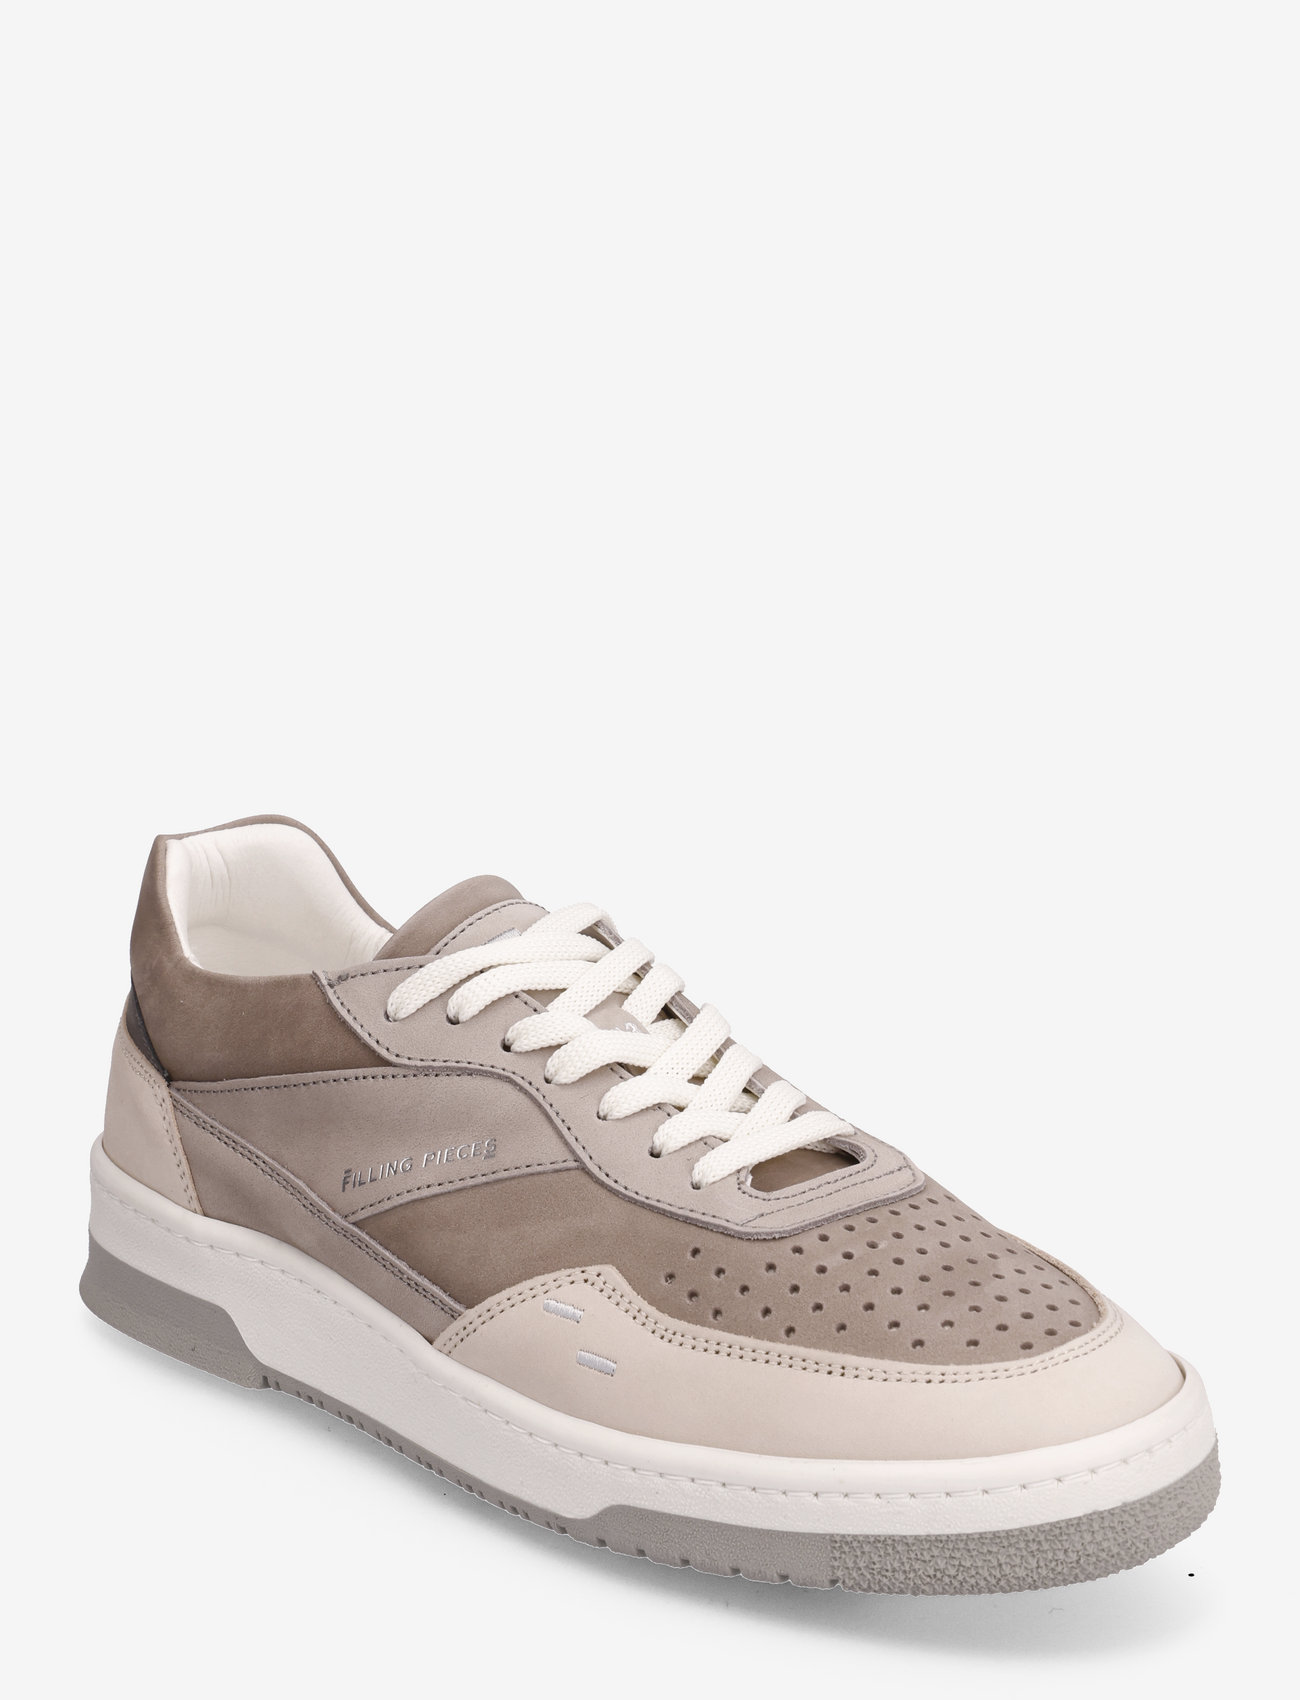 Filling Pieces - Ace Spin Light Grey - niedriger schnitt - taupe - 0